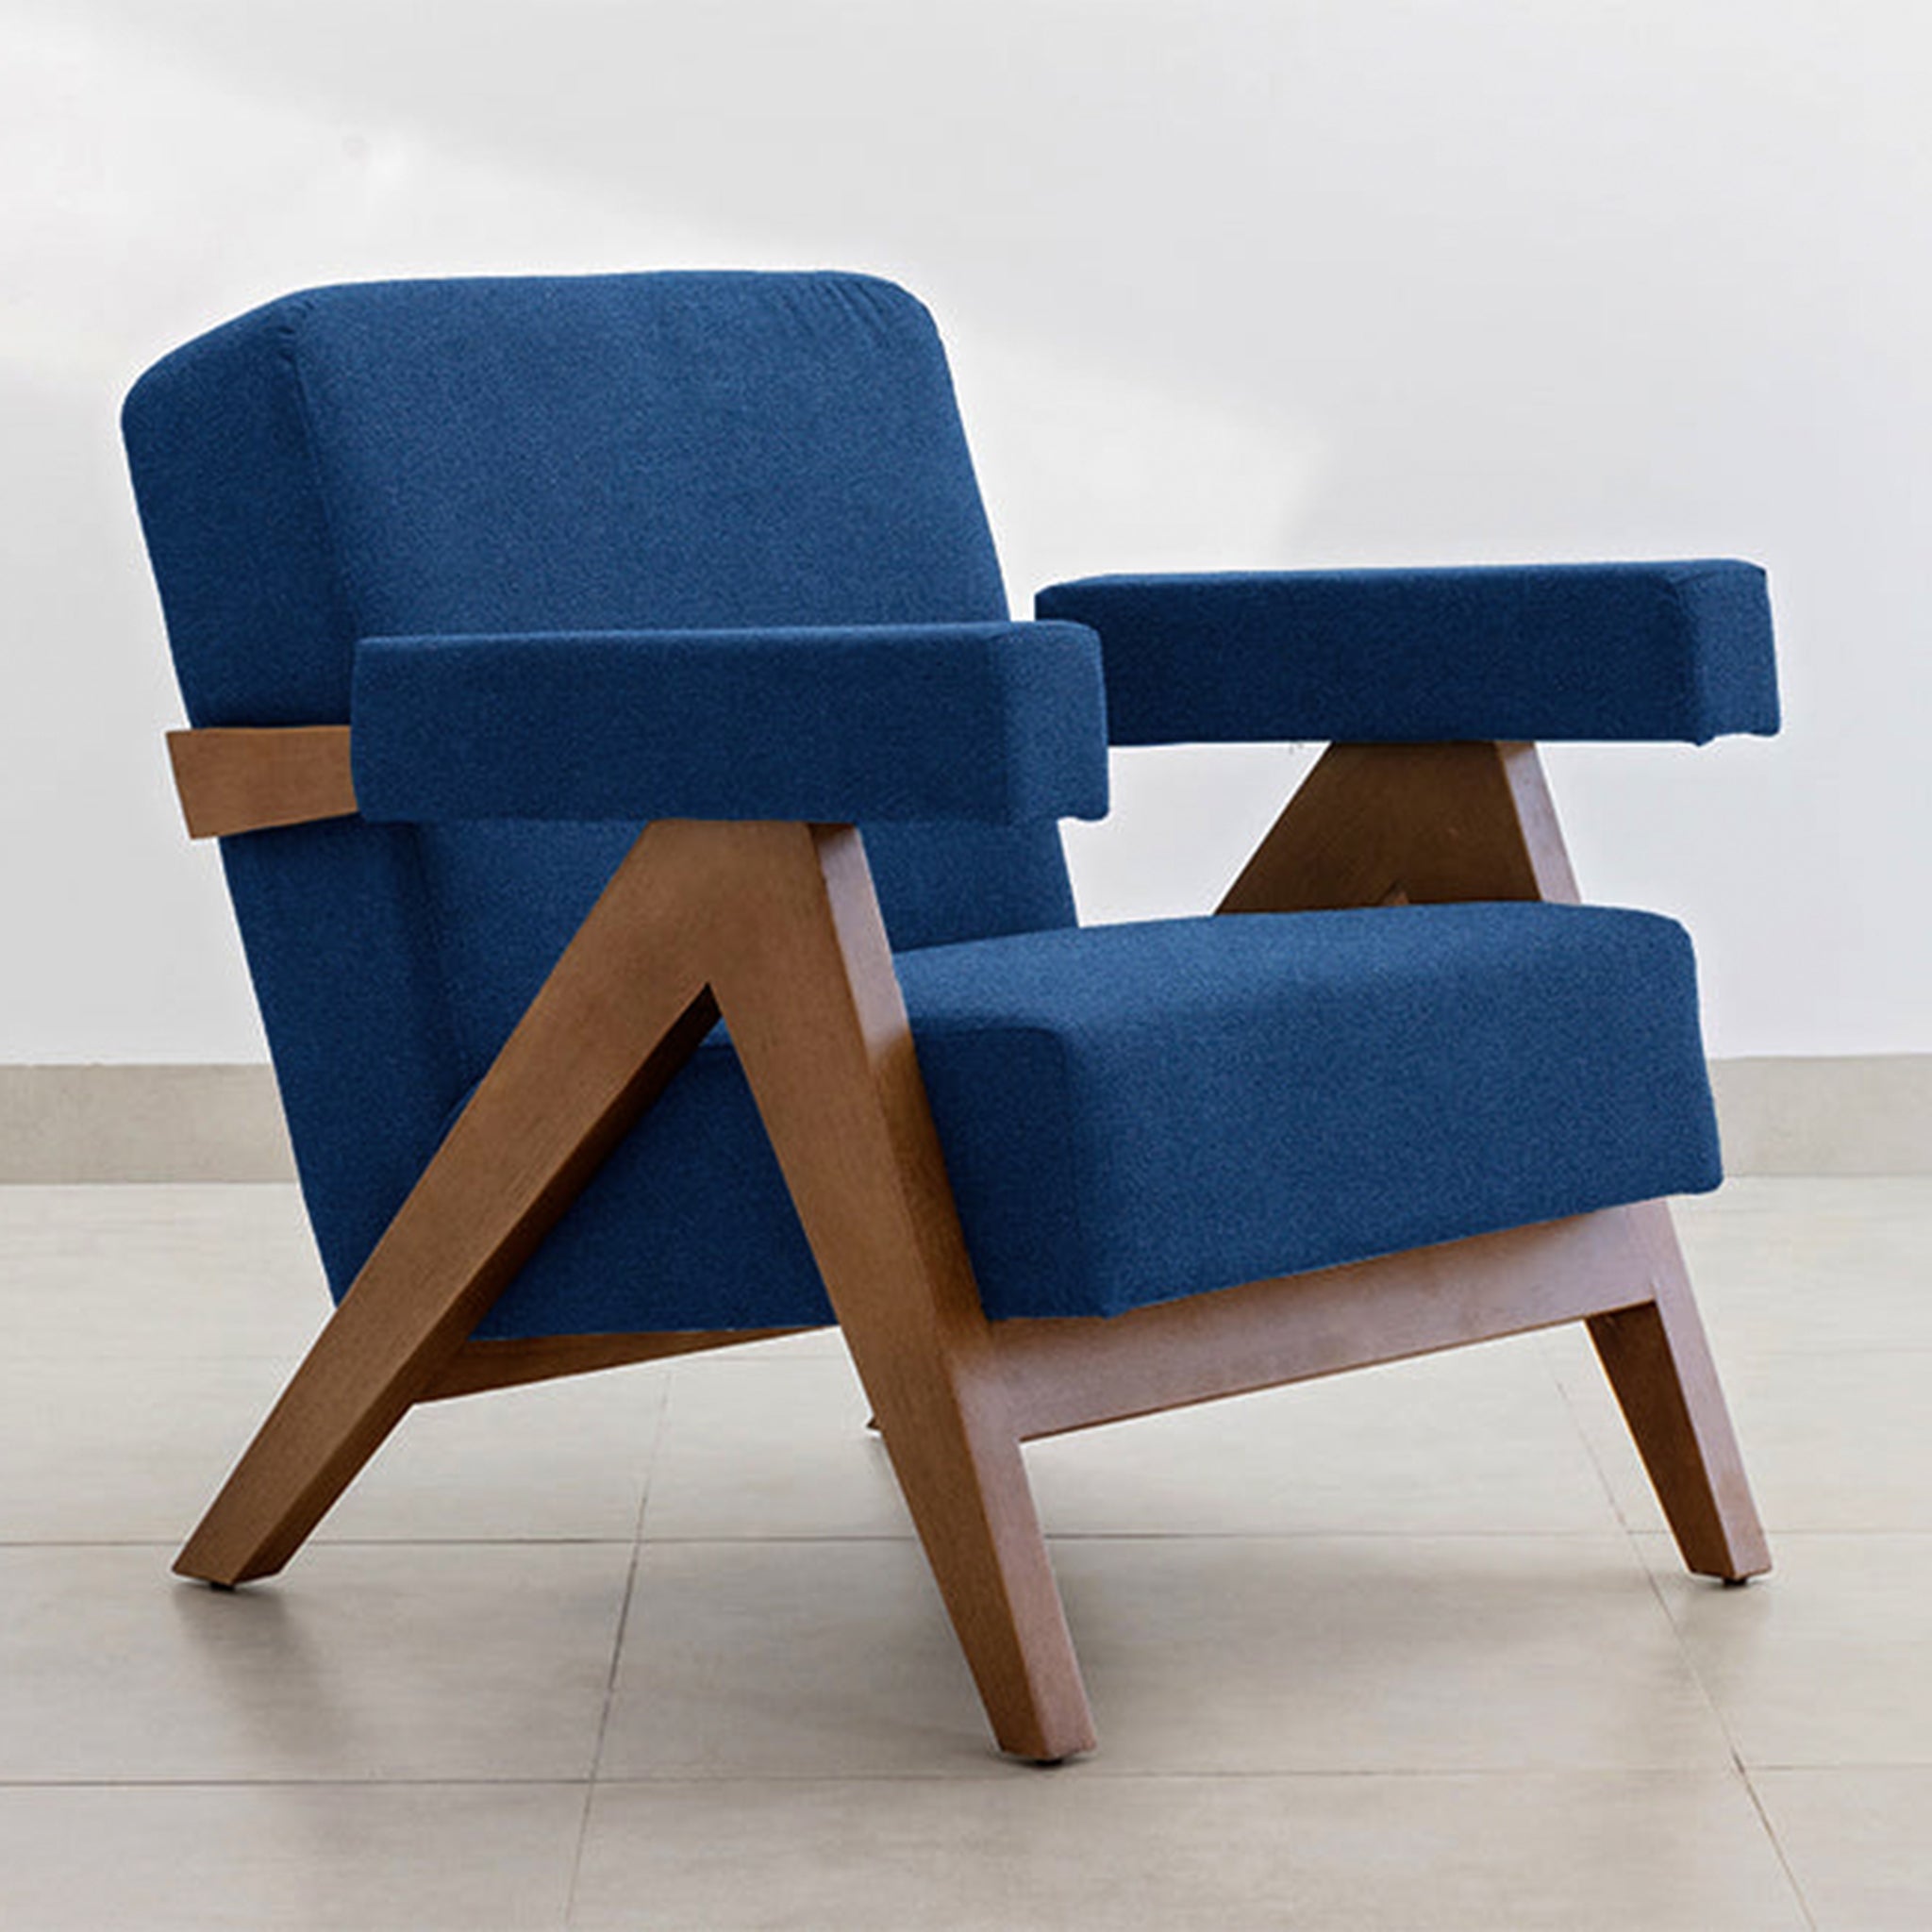 "The Pierre Accent Chair with a unique blend of wood and teal upholstery."